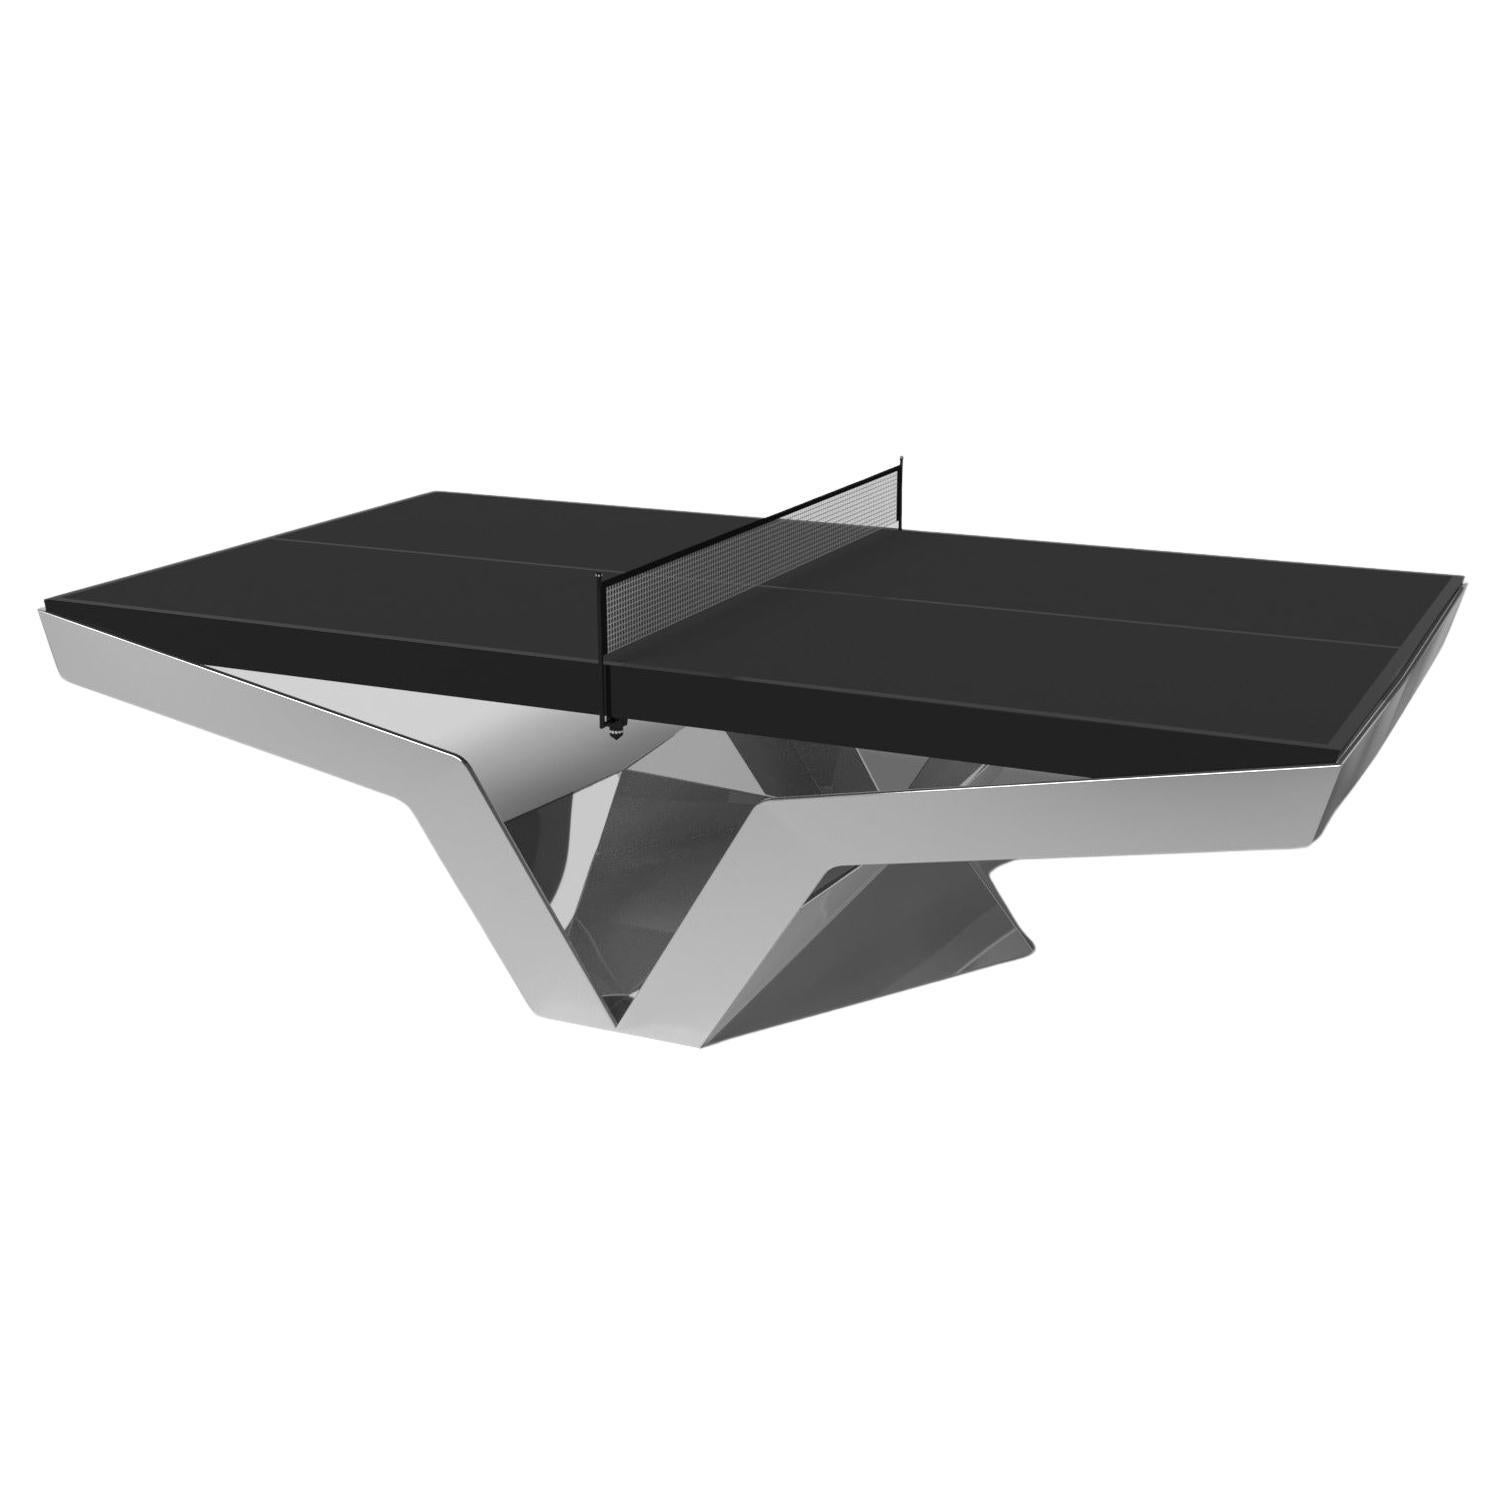 Elevate Customs Enzo Tennis Table/Stainless Steel Sheet Metal in 9' -Made in USA For Sale